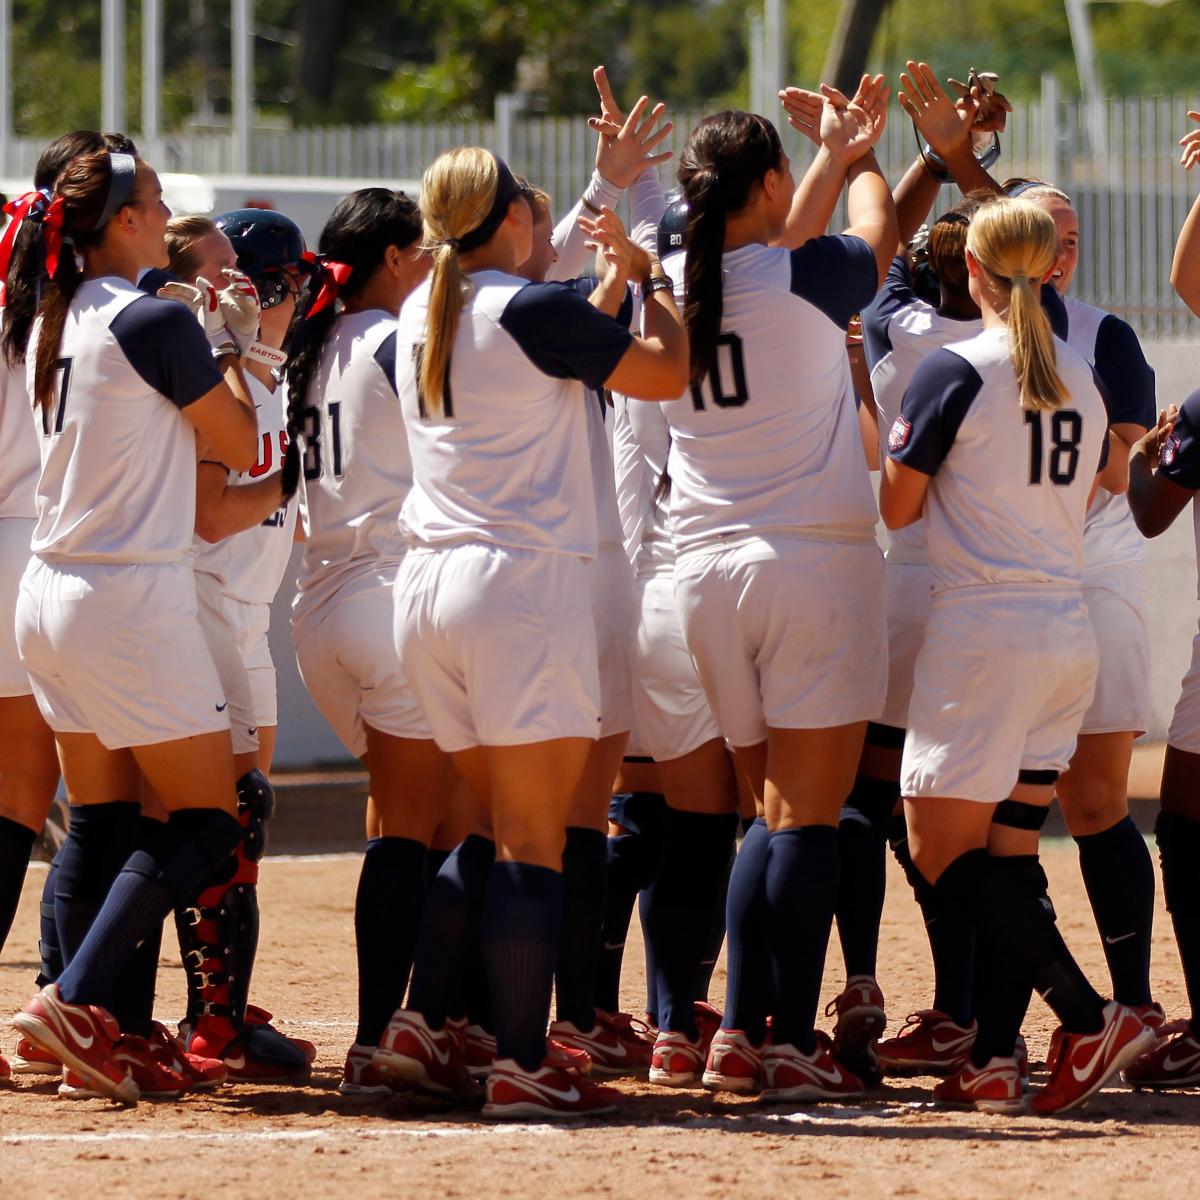 World Cup of Softball Schedule 2012: Dates, Times, Live Stream, TV Info